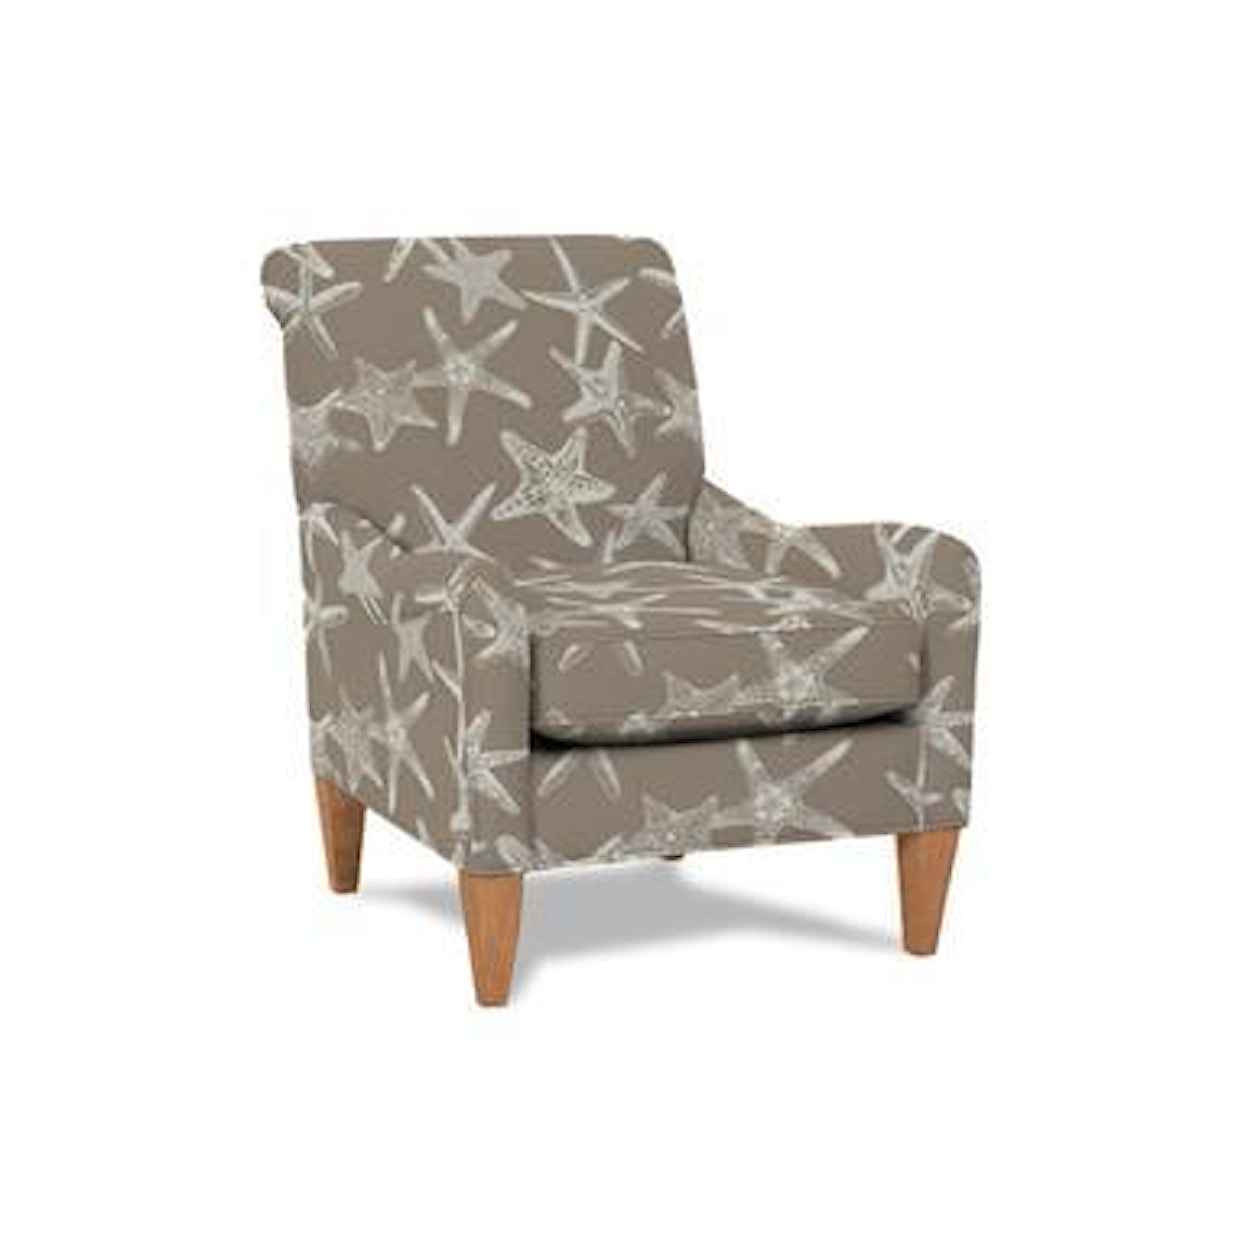 Rowe Chairs and Accents Highland Chair